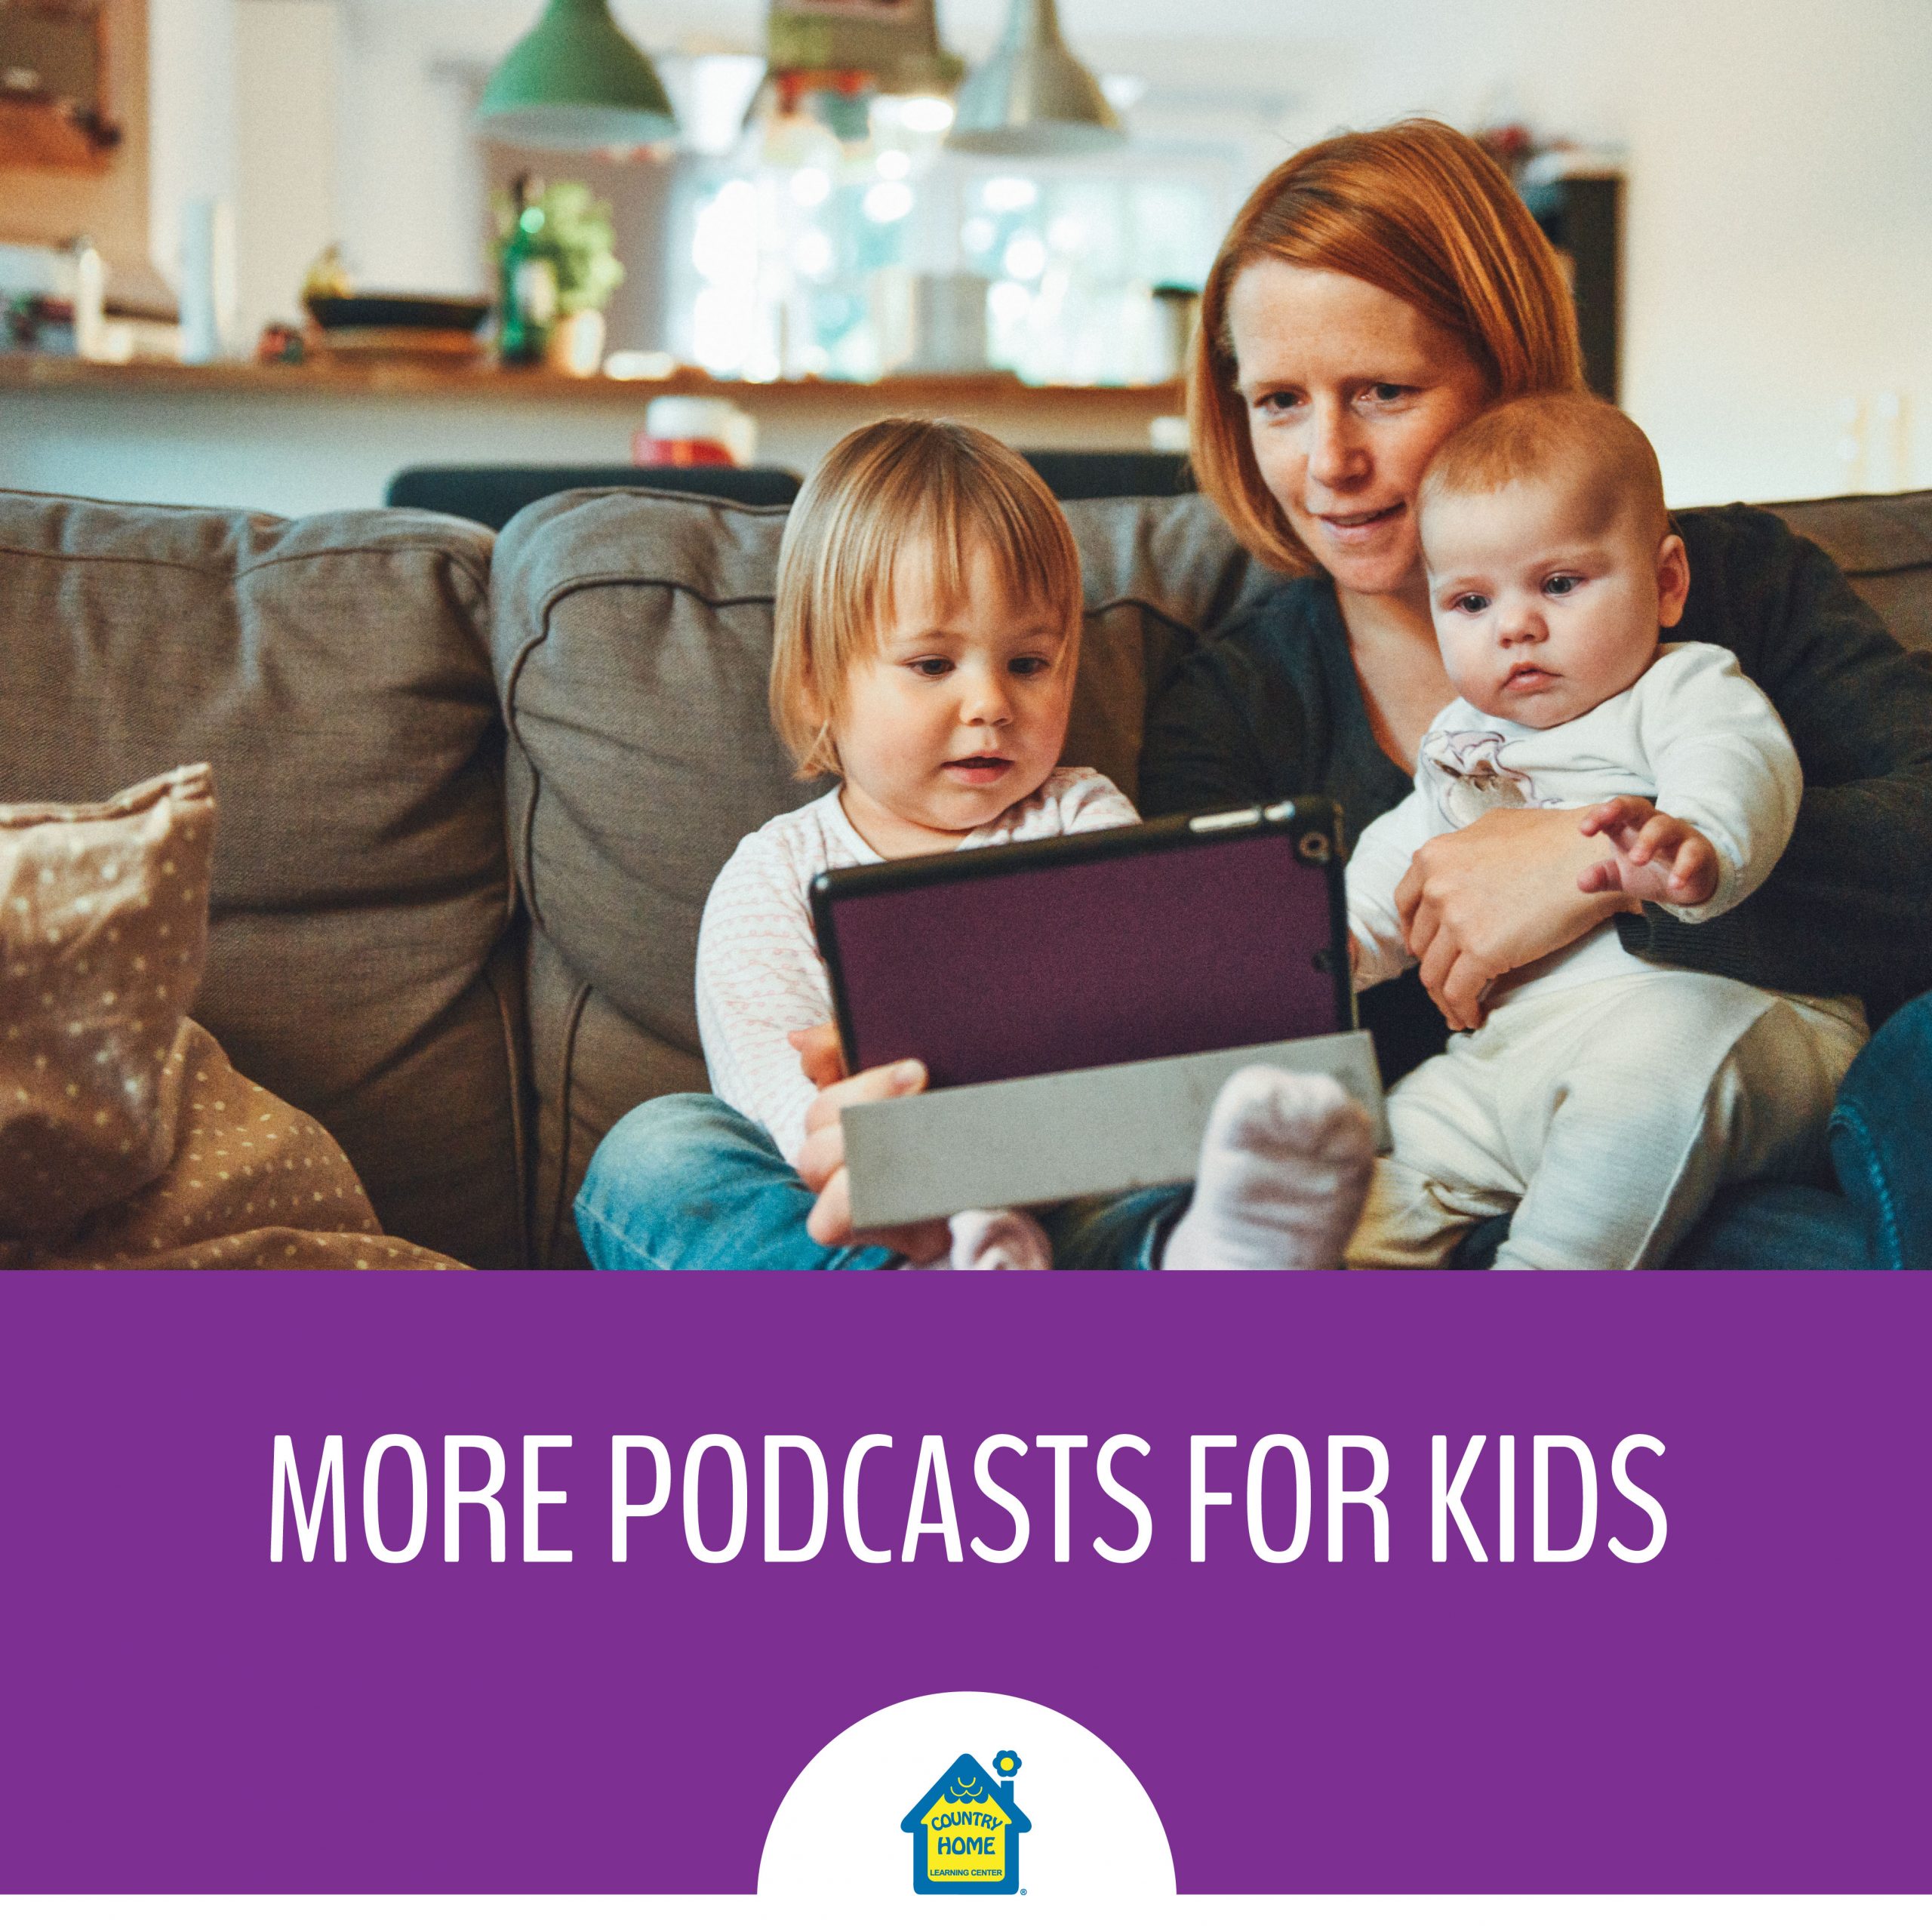 More Podcasts for Kids